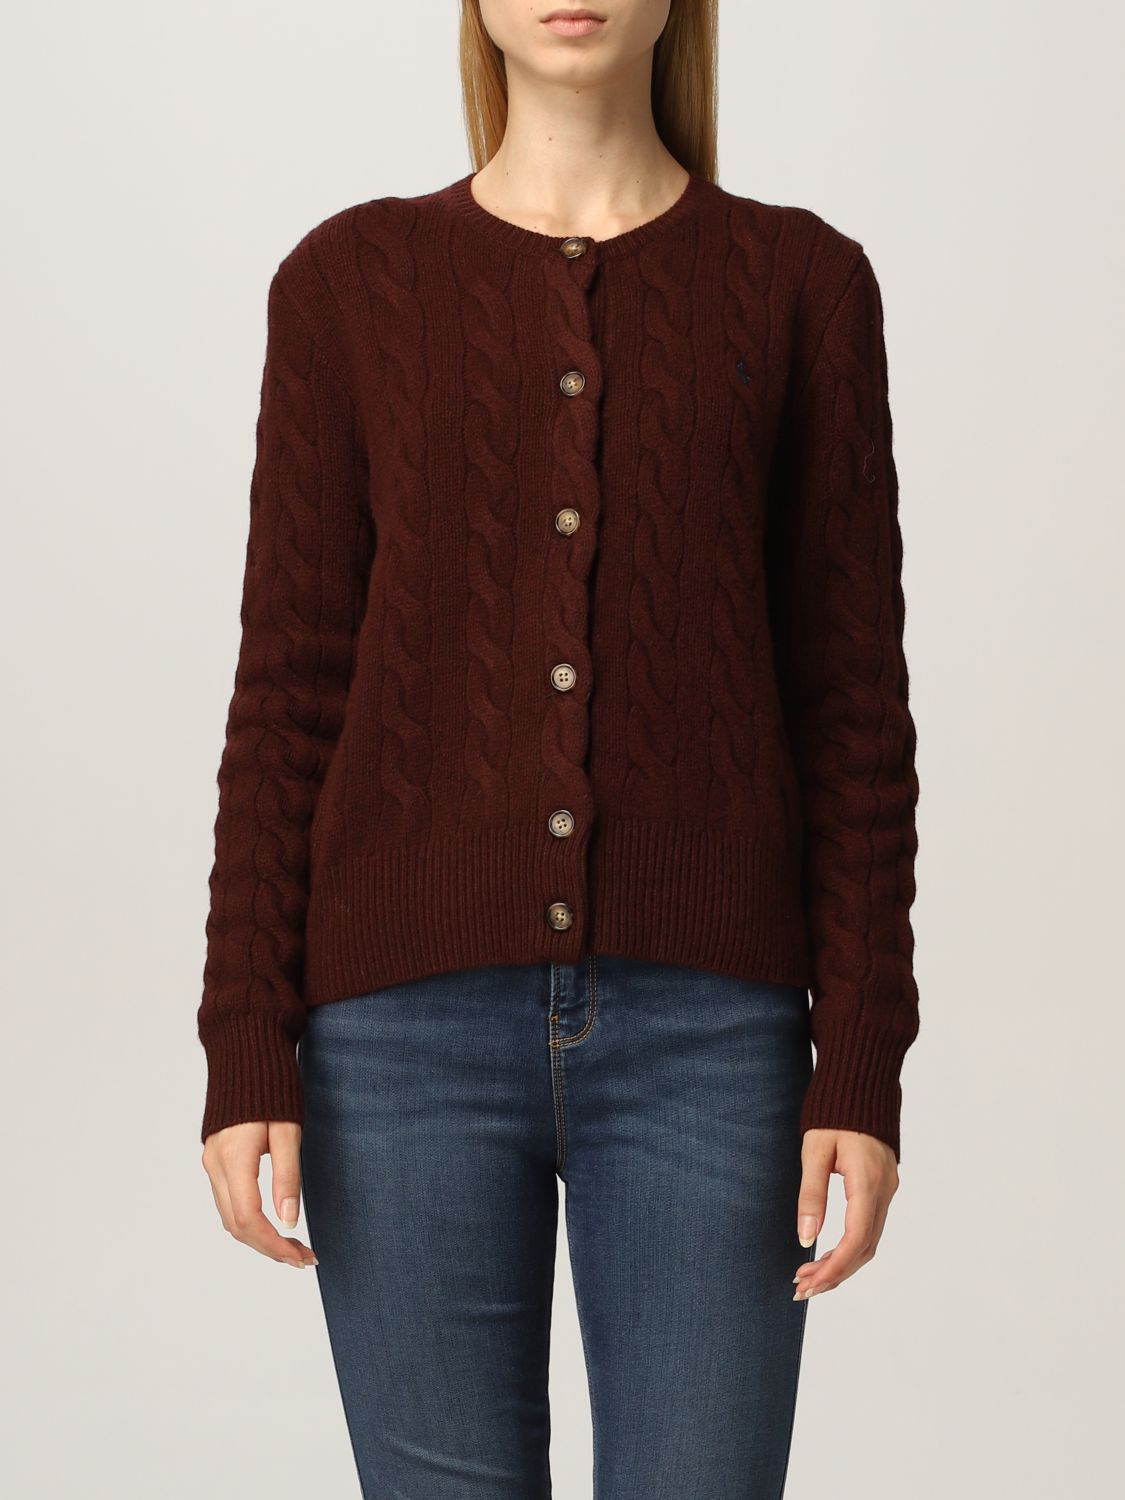 POLO RALPH LAUREN: cardigan in wool and cashmere - Burgundy | Polo Ralph  Lauren cardigan 211801493 online on 